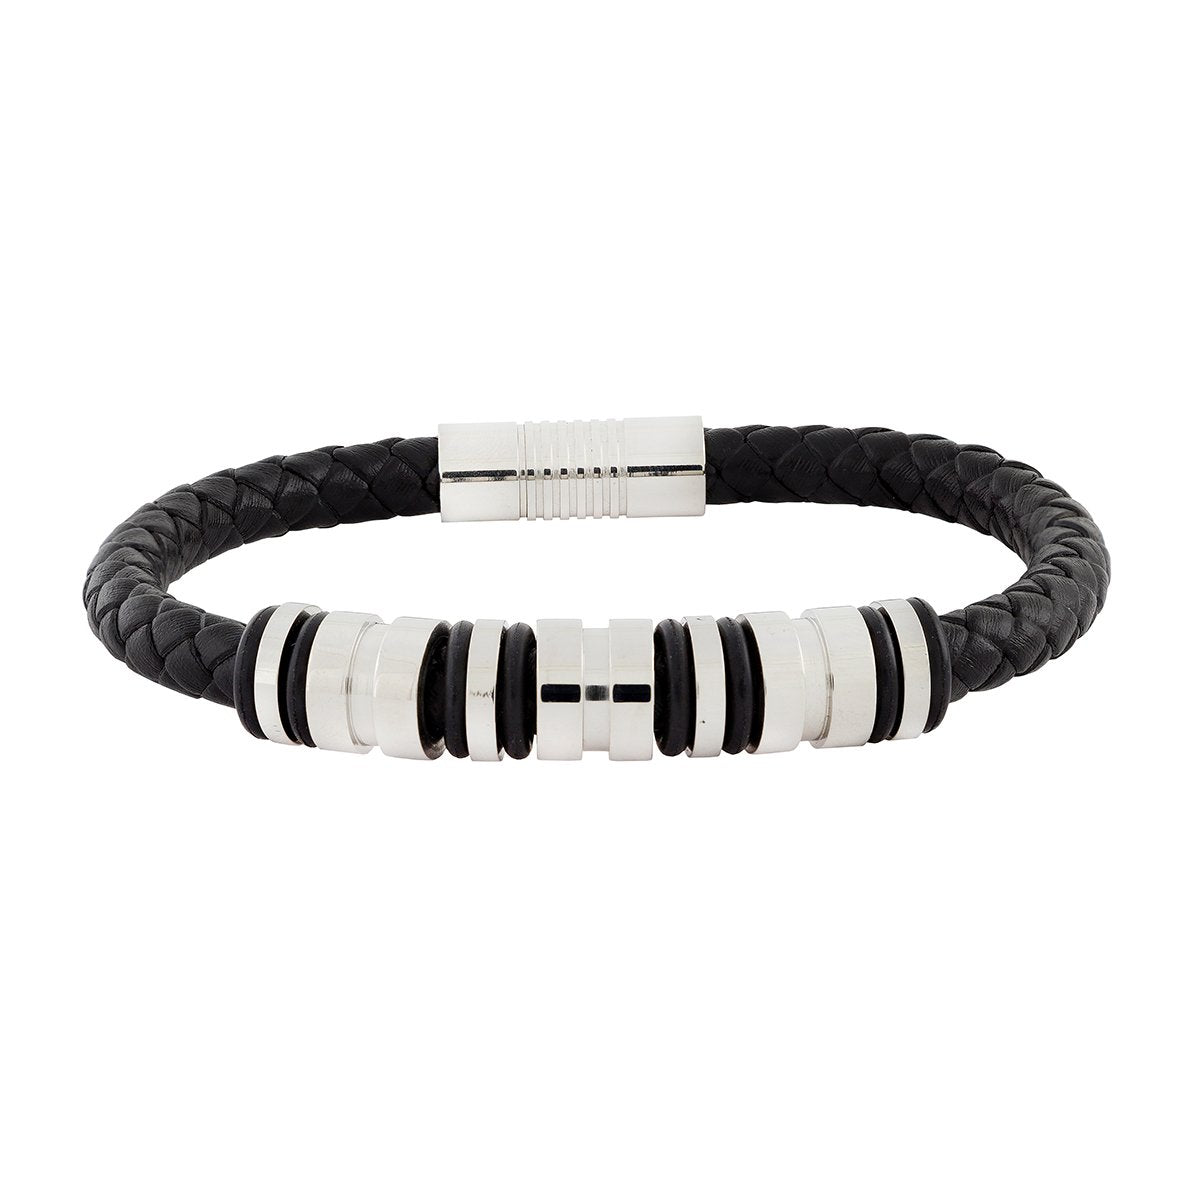 High Quality Braided Leather 316L Stainless Steel Wrist Band Bracelet